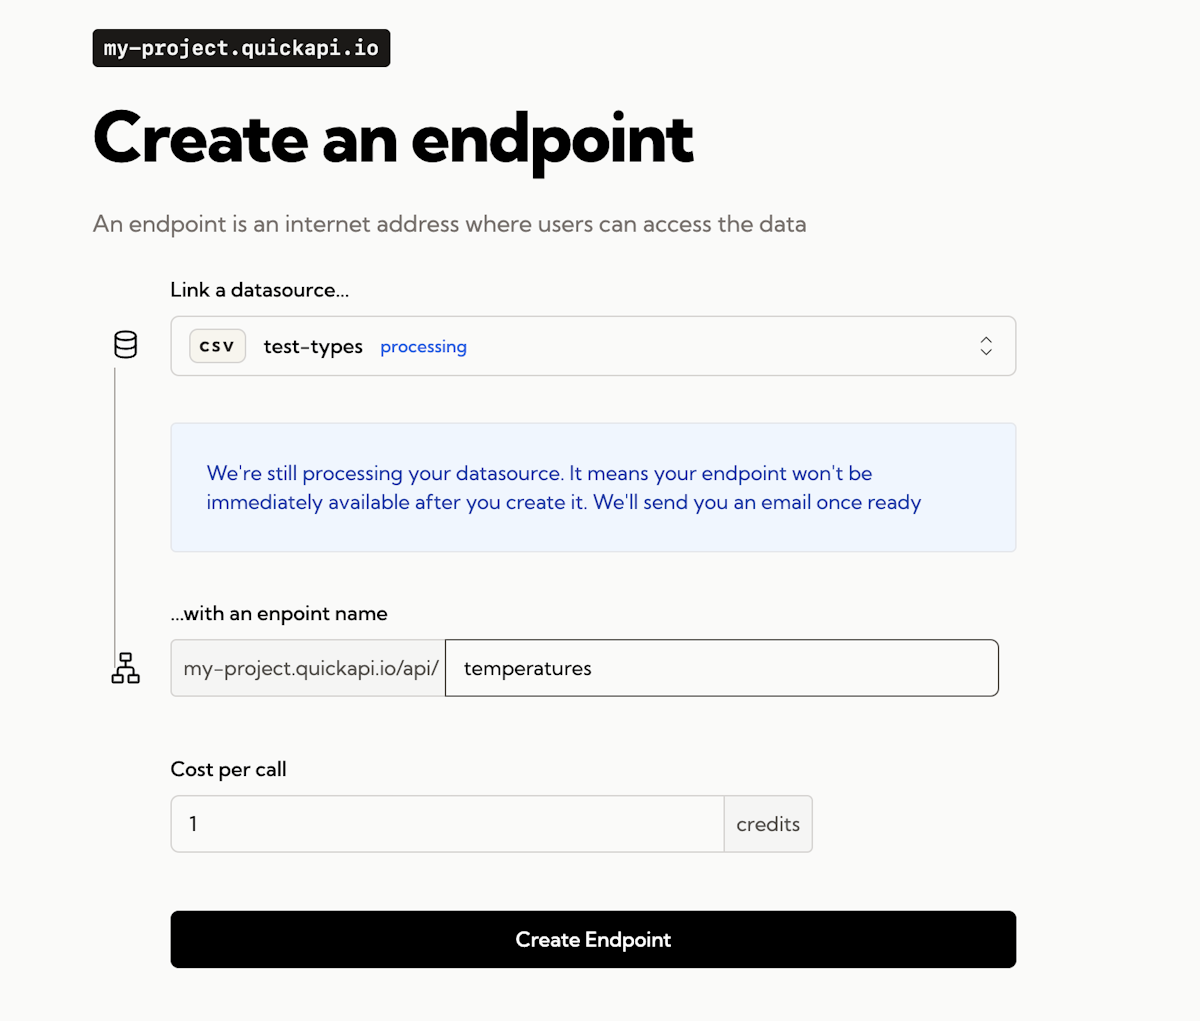 Linking the file to the API endpoint